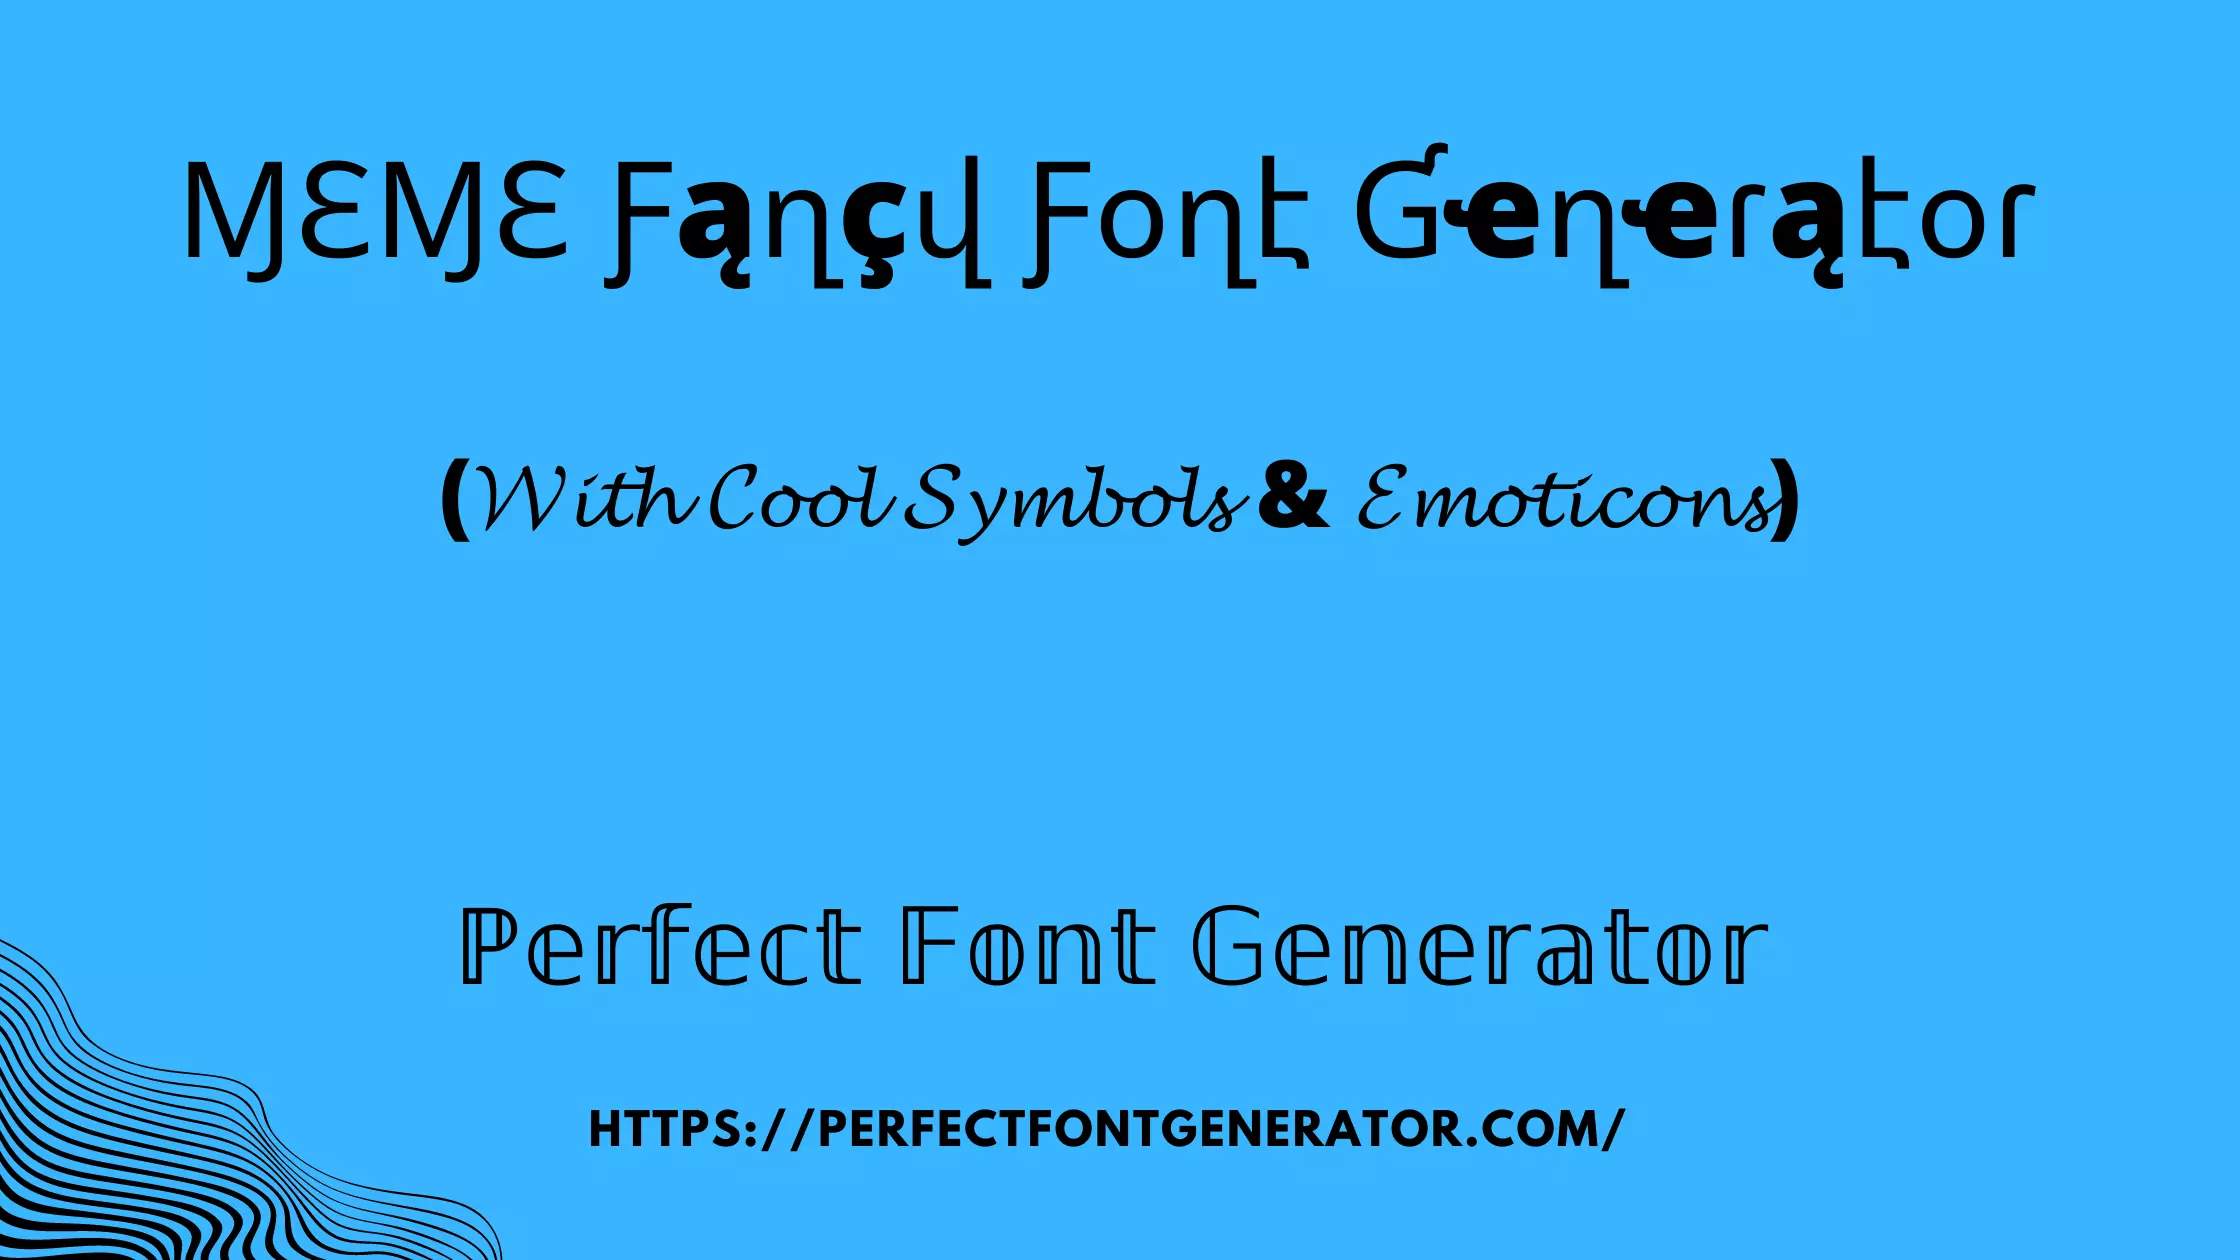 meme-fancy-font-text-letter-generator-tool-with-cool-symbols-online-copy-paste-tool